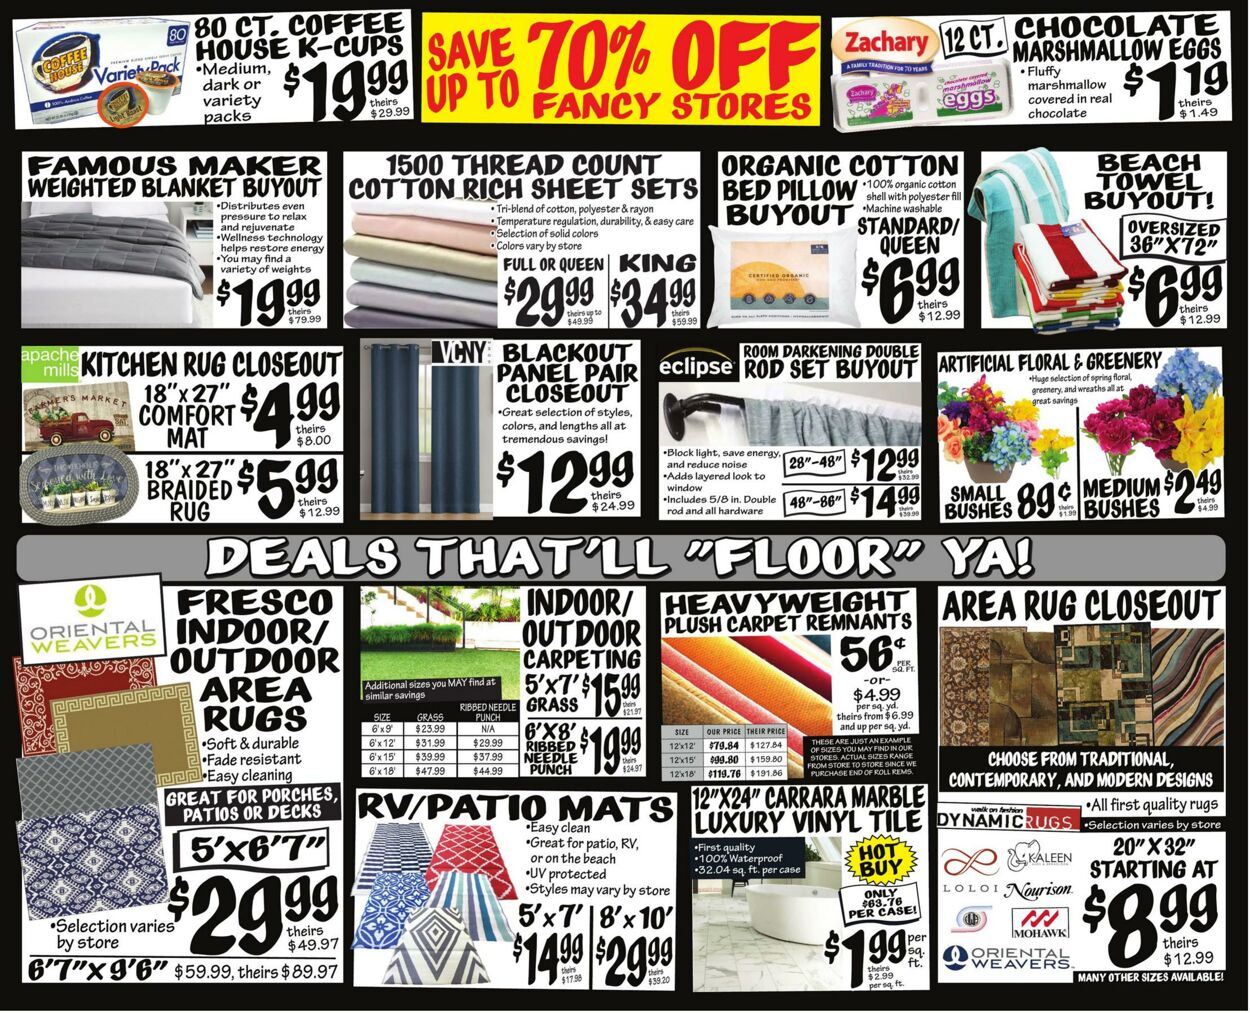 Weekly ad Ollie's 03/29/2023 - 04/05/2023